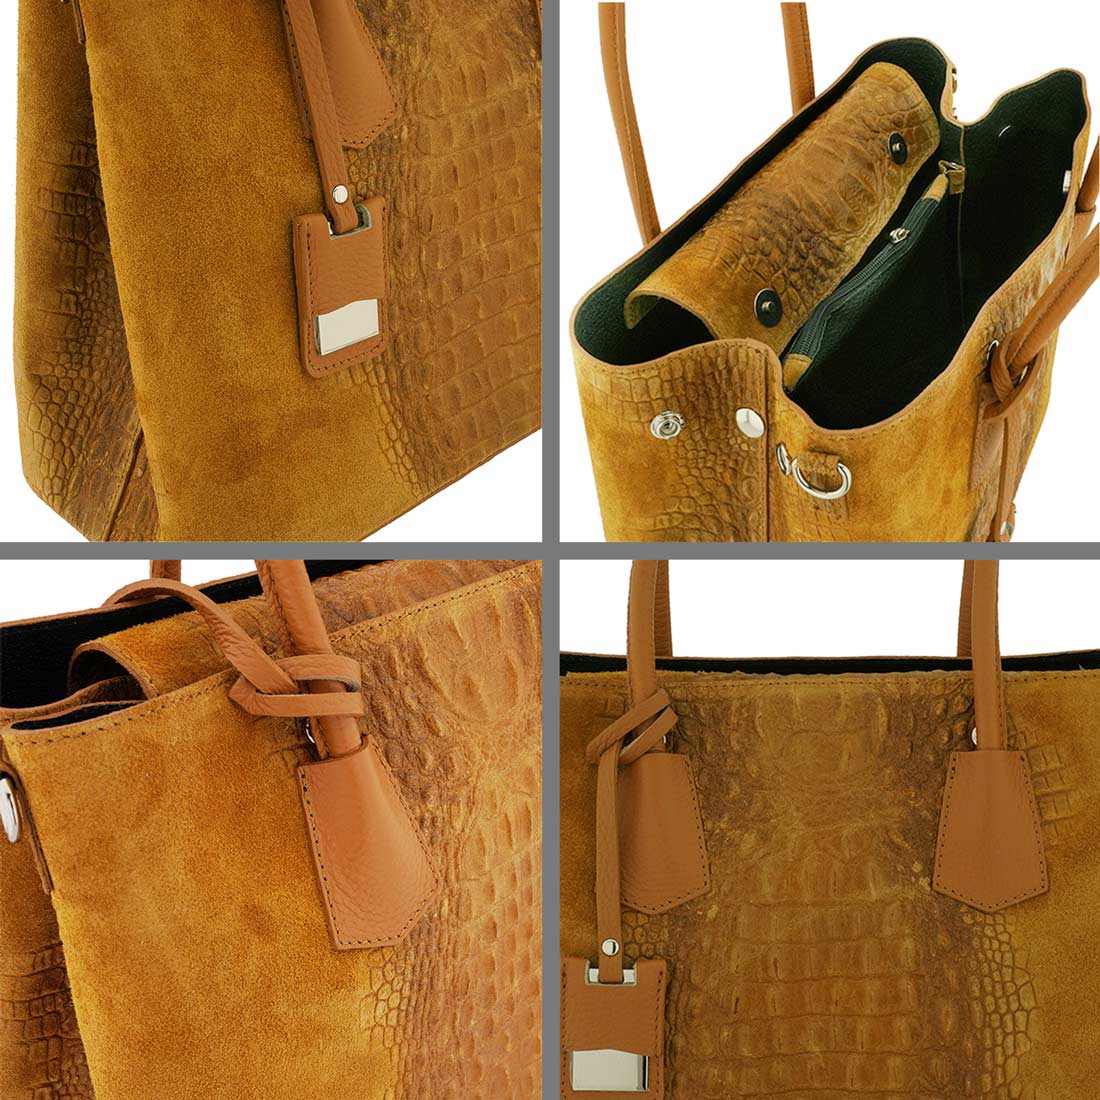 Fioretta Italian Genuine Leather Suede Carryall Top Handle Tote Bag For Women - Camel Brown